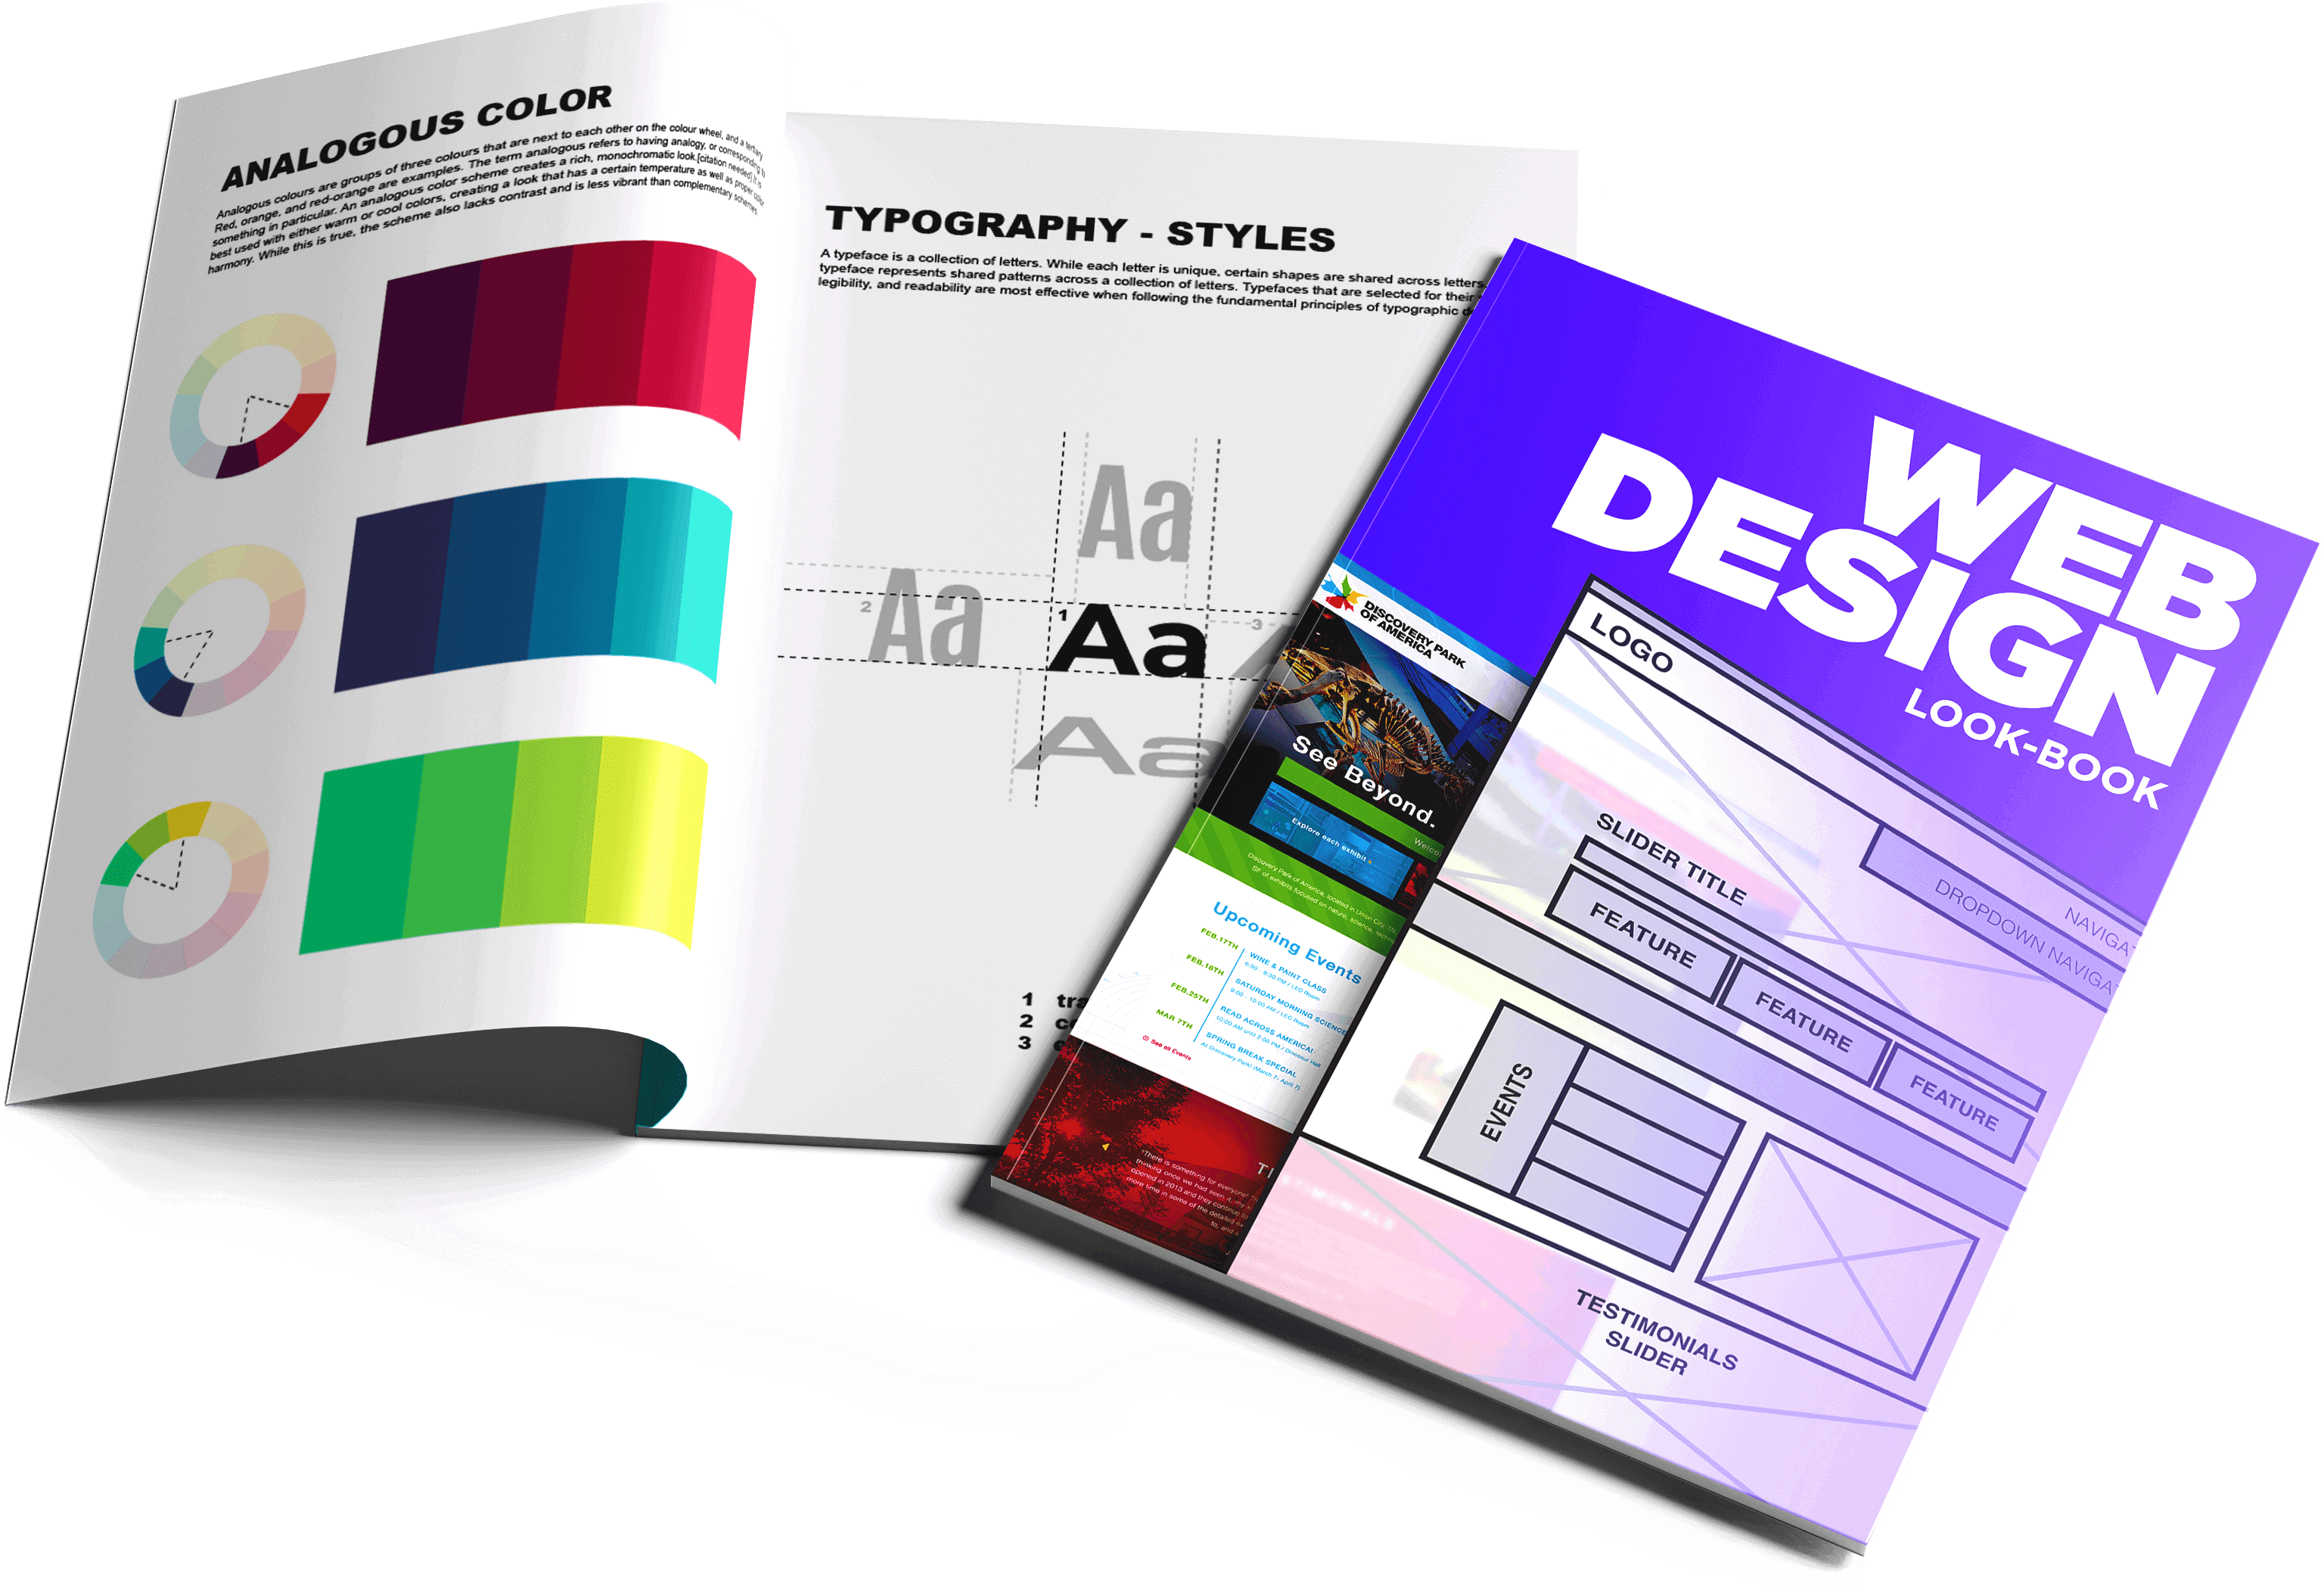 web design look book for clients to choose what colors and designs they want for their new site from a nashville web design company